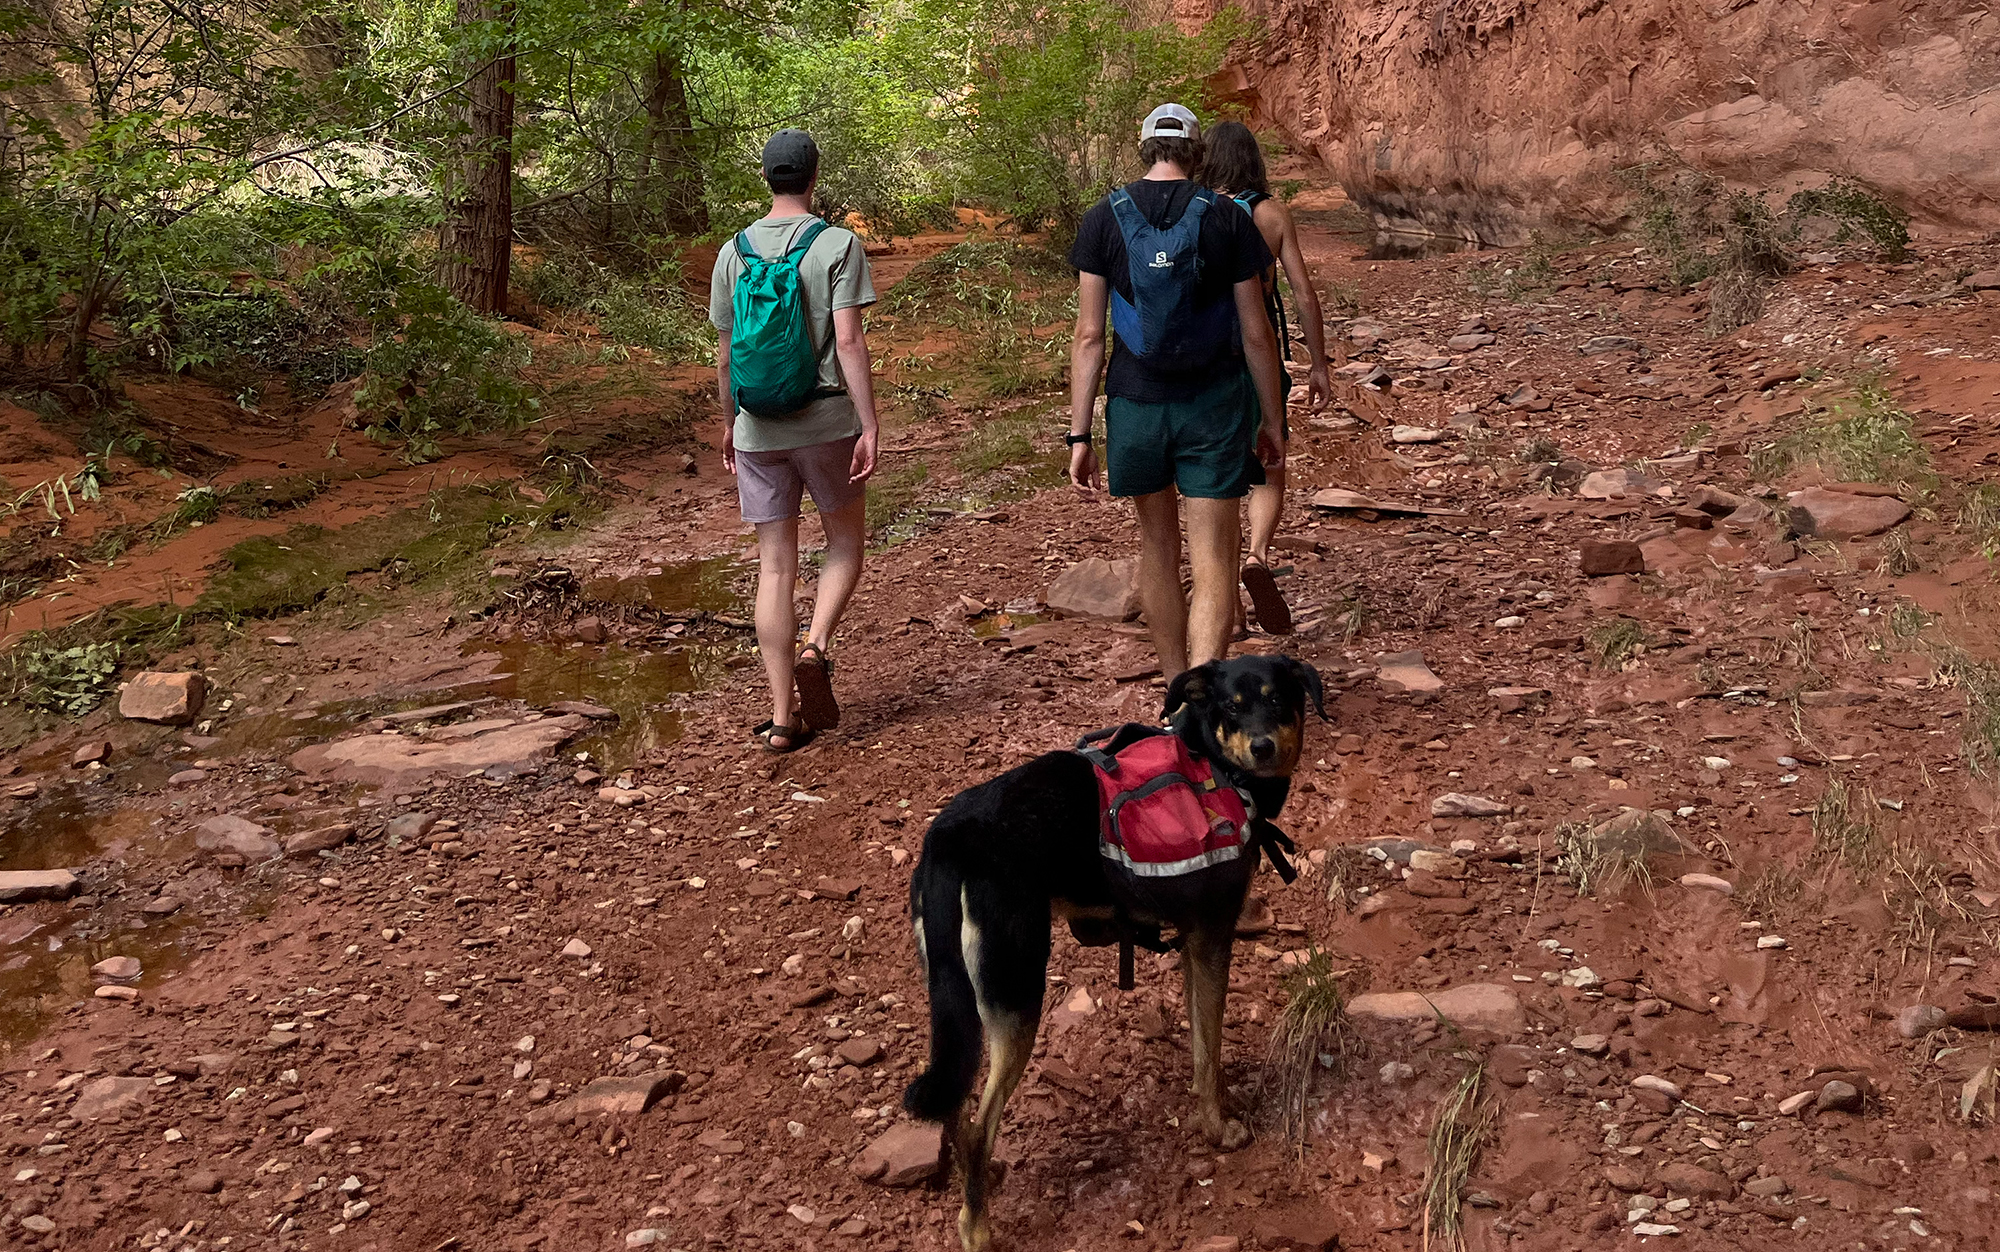 Dog wearing a backpack walks behind group of hikers.